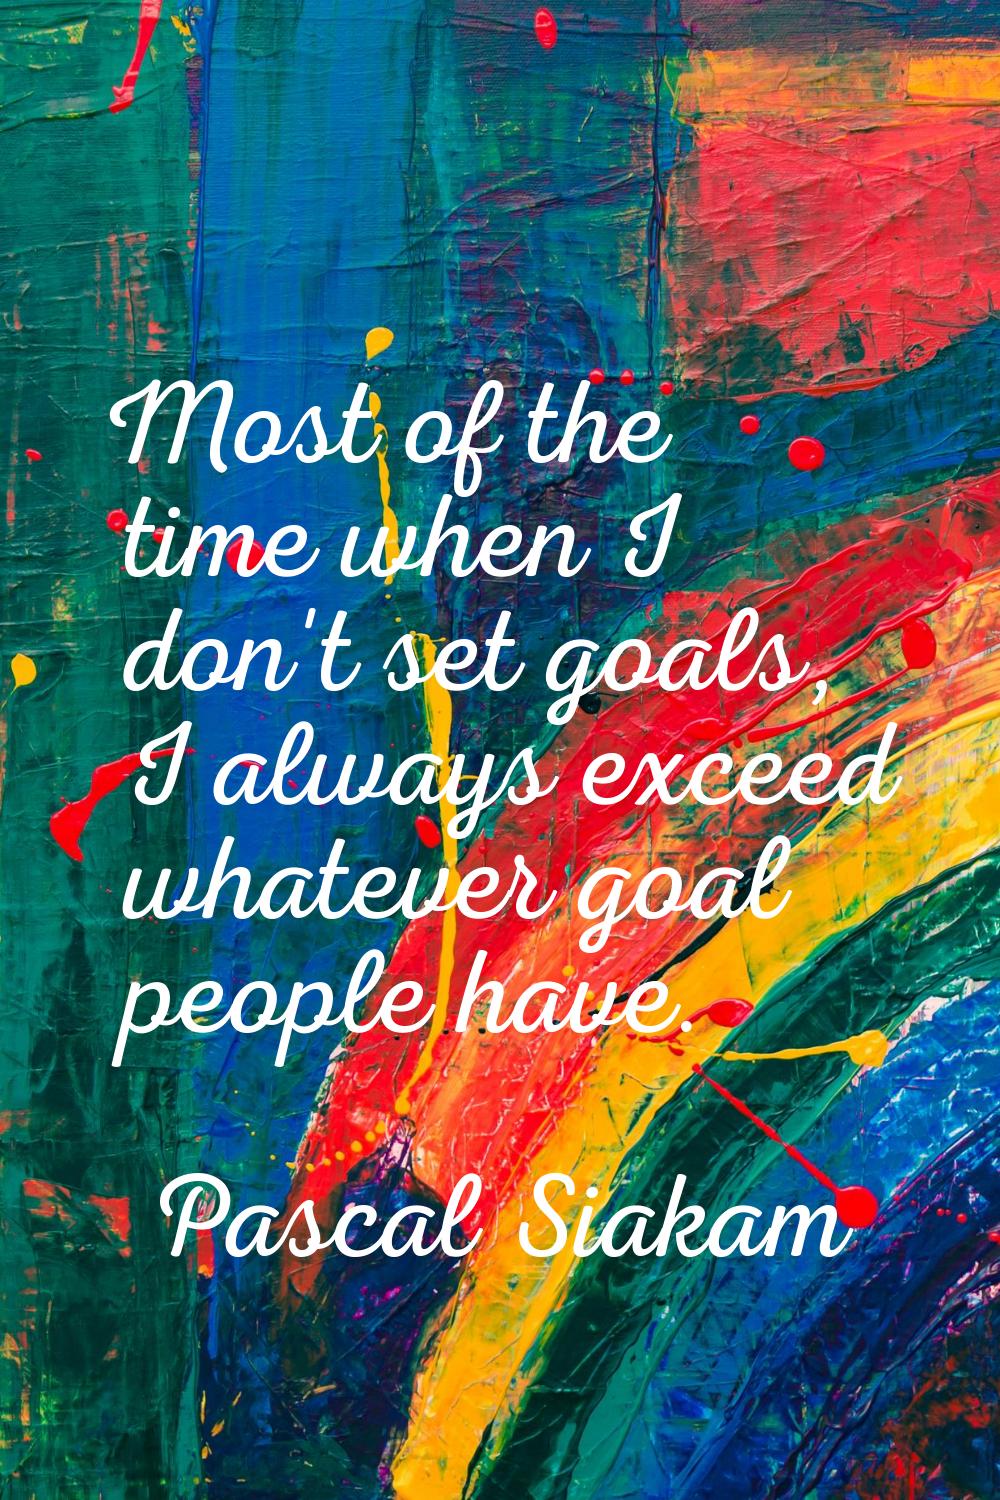 Most of the time when I don't set goals, I always exceed whatever goal people have.